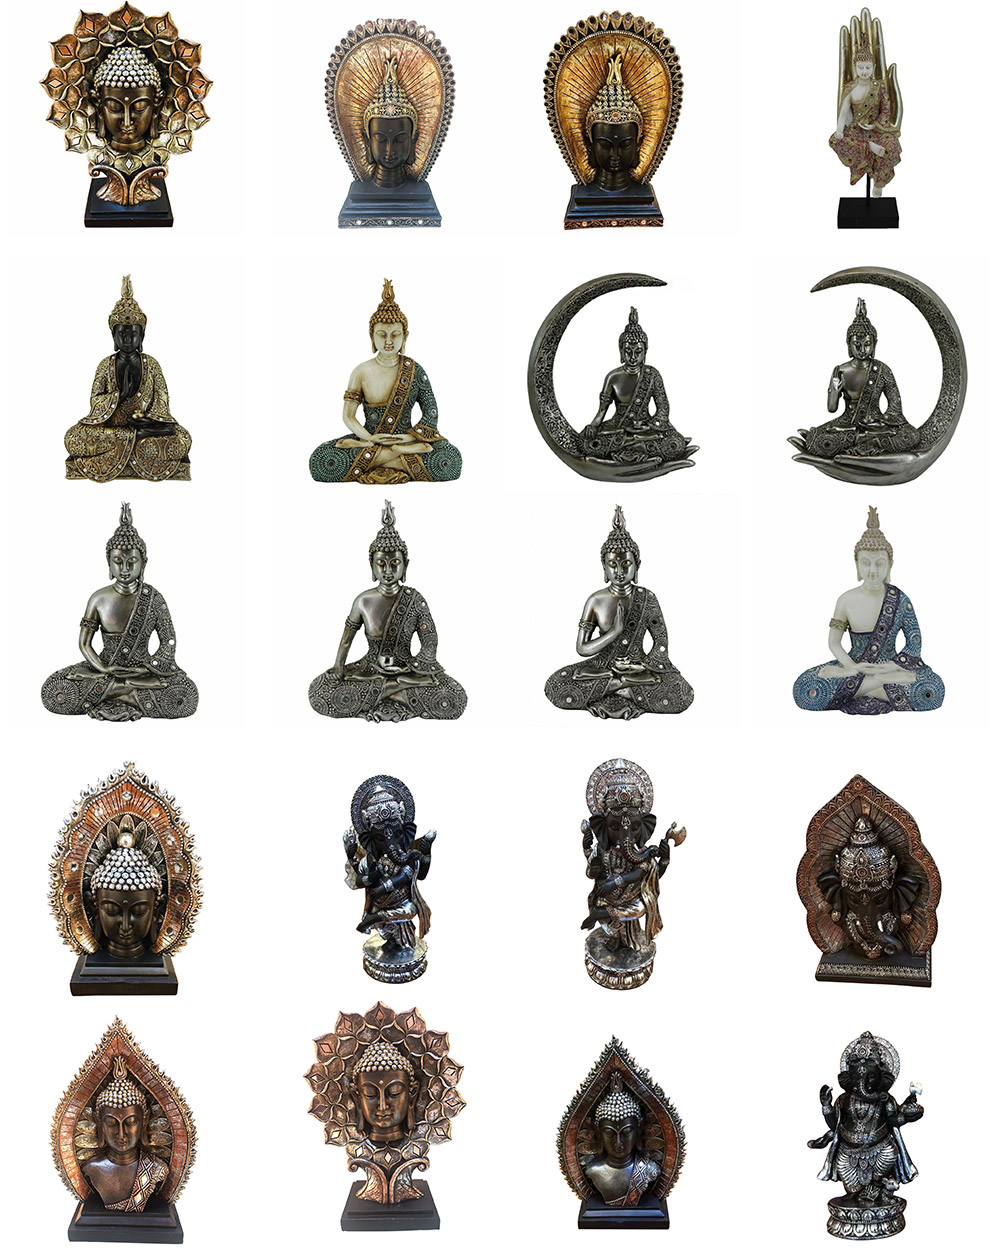 2020 Hotsell tabletop inner heart peaceful Meditating sliver Buddha Resin Thai buddha Statue Product with Foundation